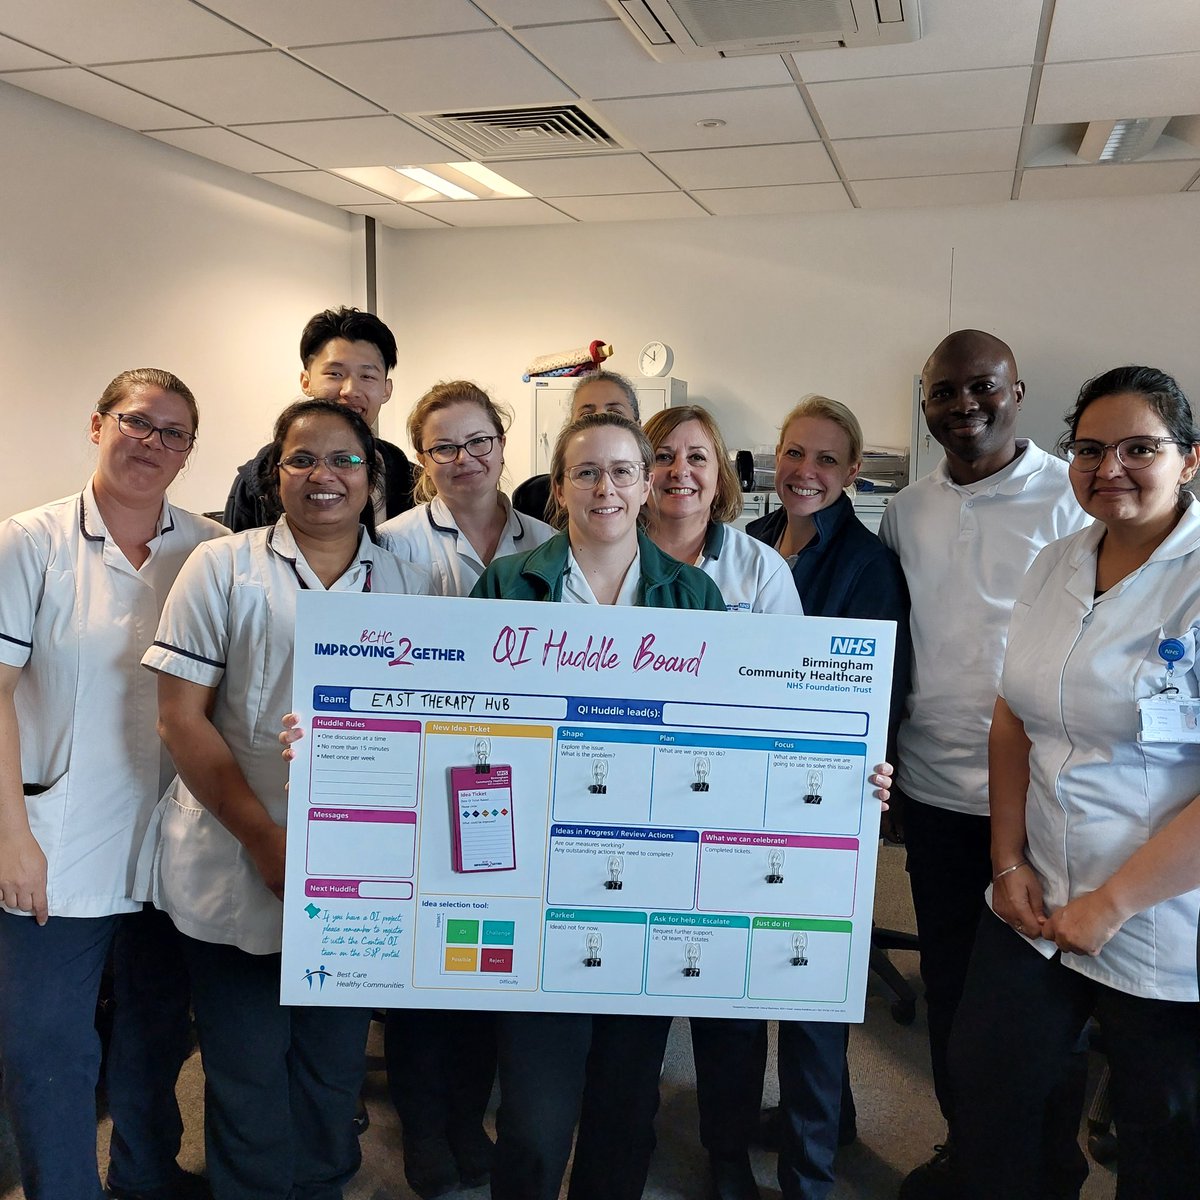 Delighted to issue East Therapy Hub their QI huddle board this morning! Really good to learn about some of their fantastic ideas using a QI approach #qualityimprovement #changeagents #qihuddles @bhamcommunity